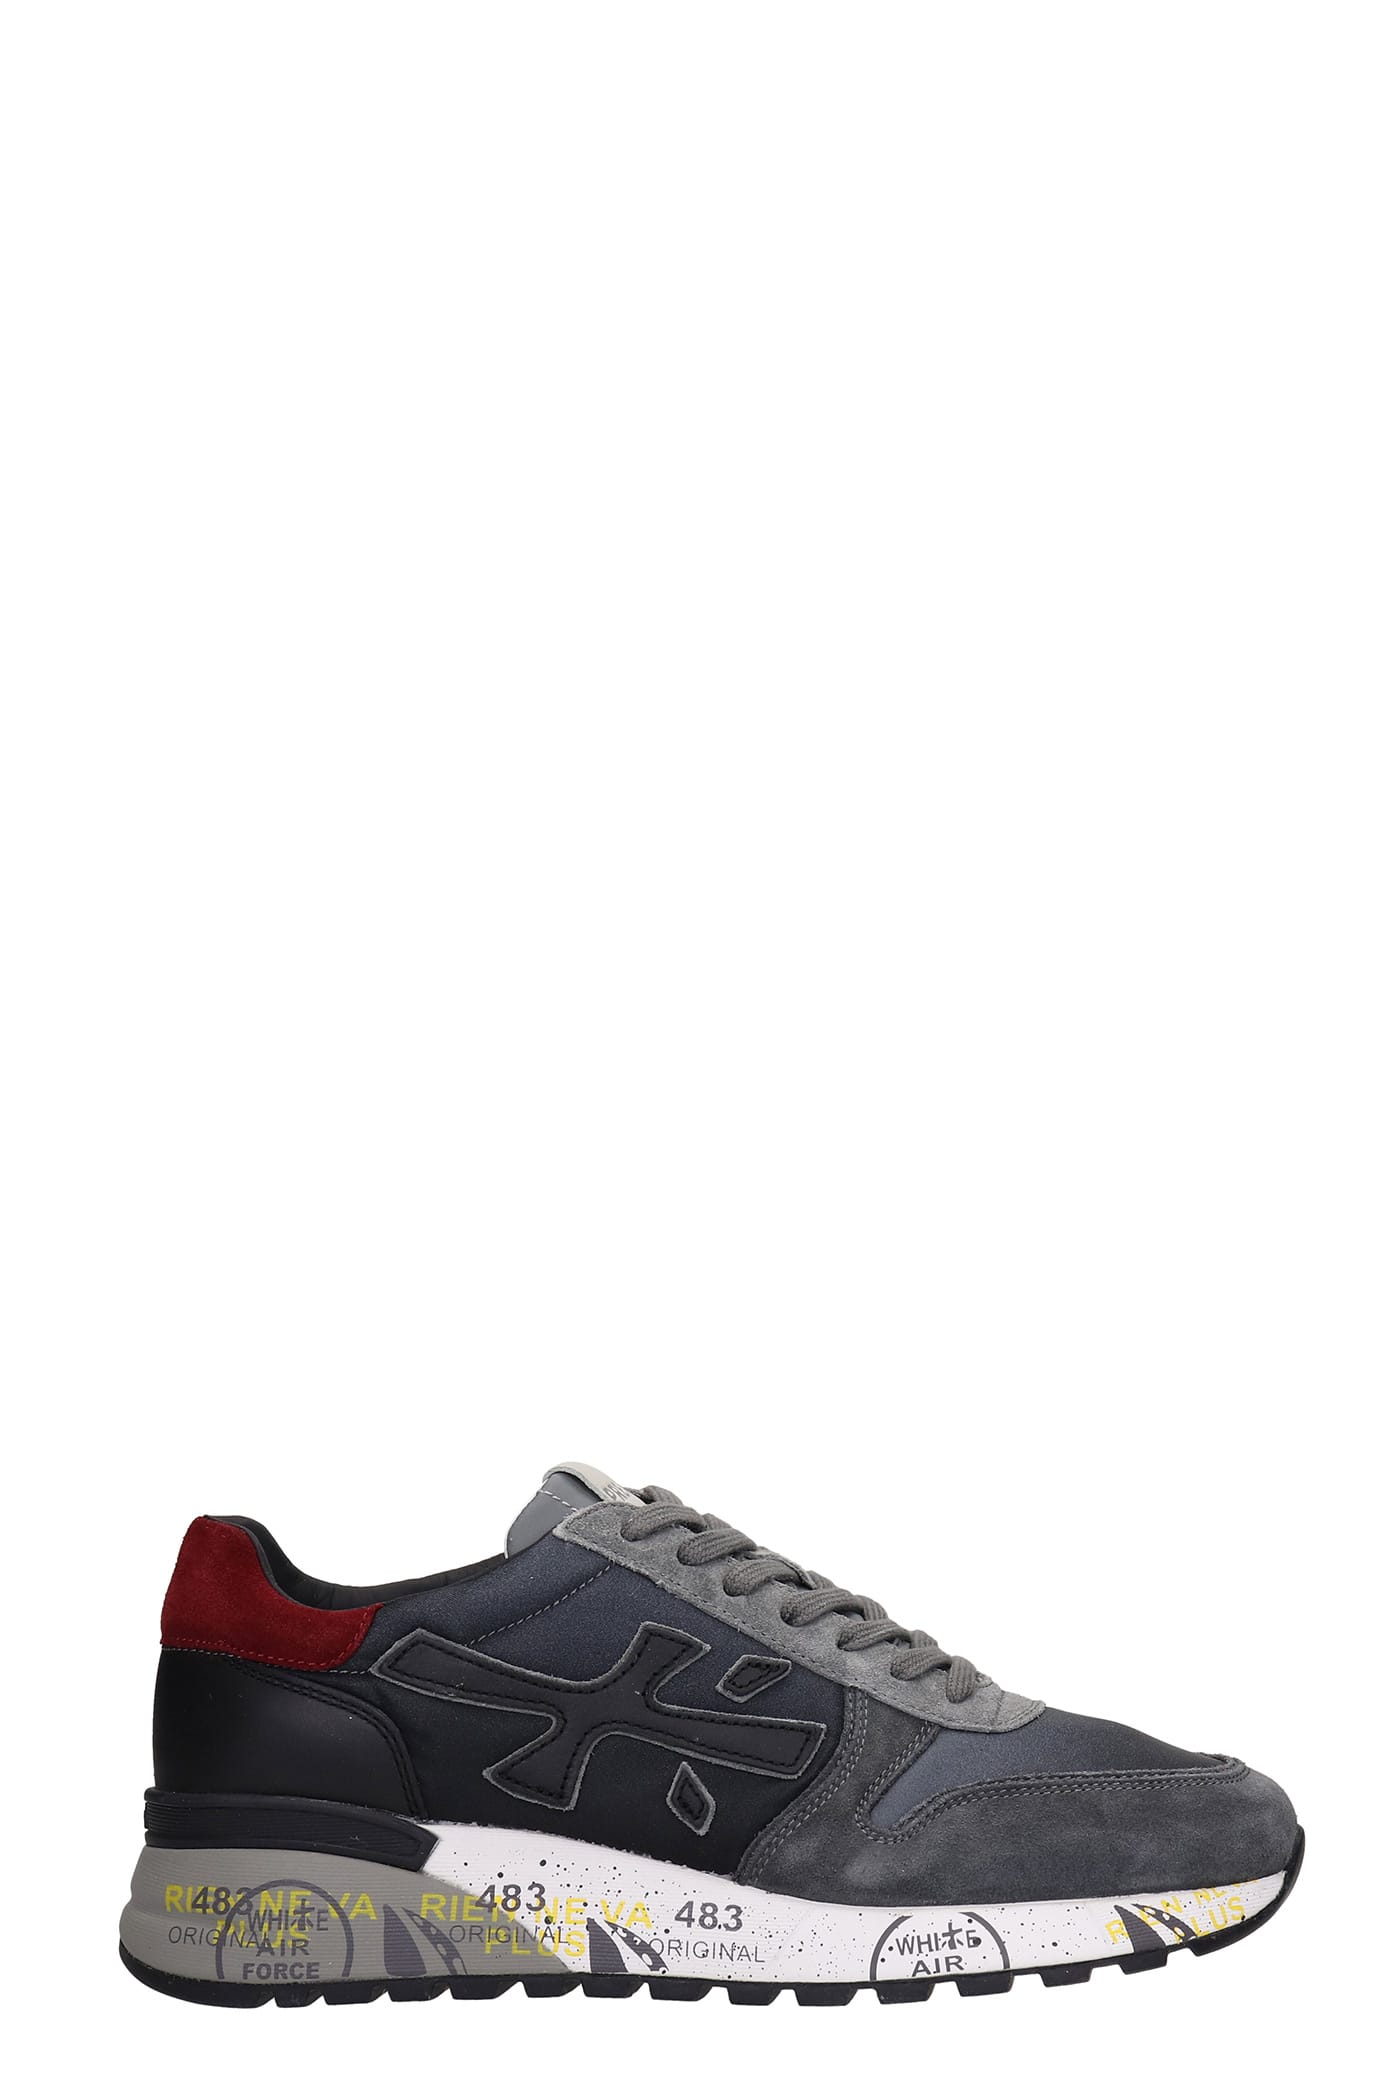 Premiata Mick Sneakers In Grey Suede And Fabric